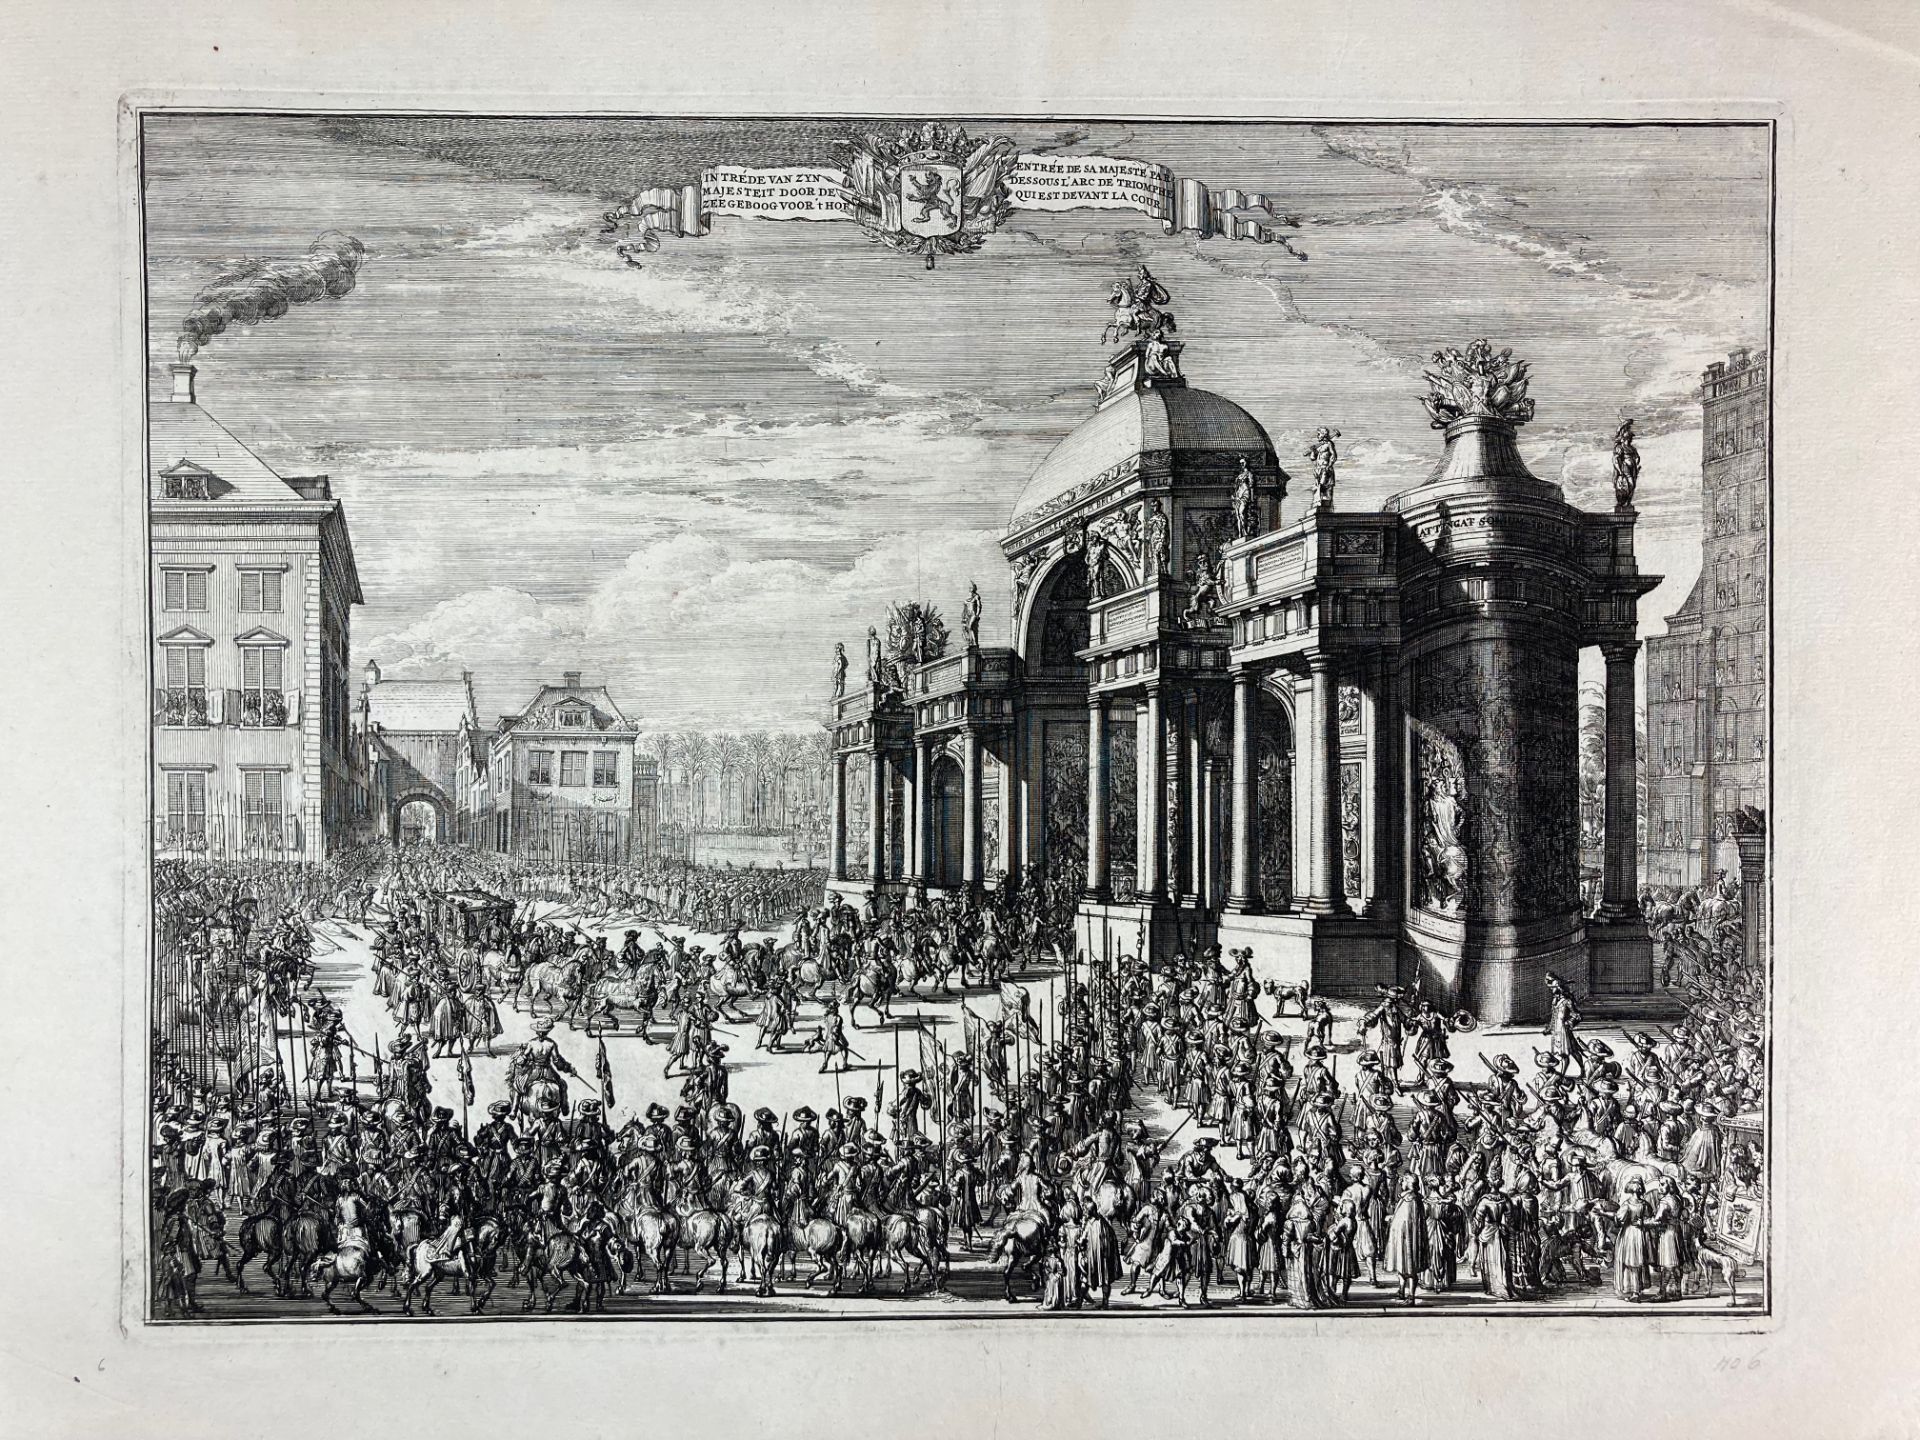 COLLECTION of 74 engraved plates representing Dutch historical events, coronations/ceremonies, gathe - Image 2 of 8